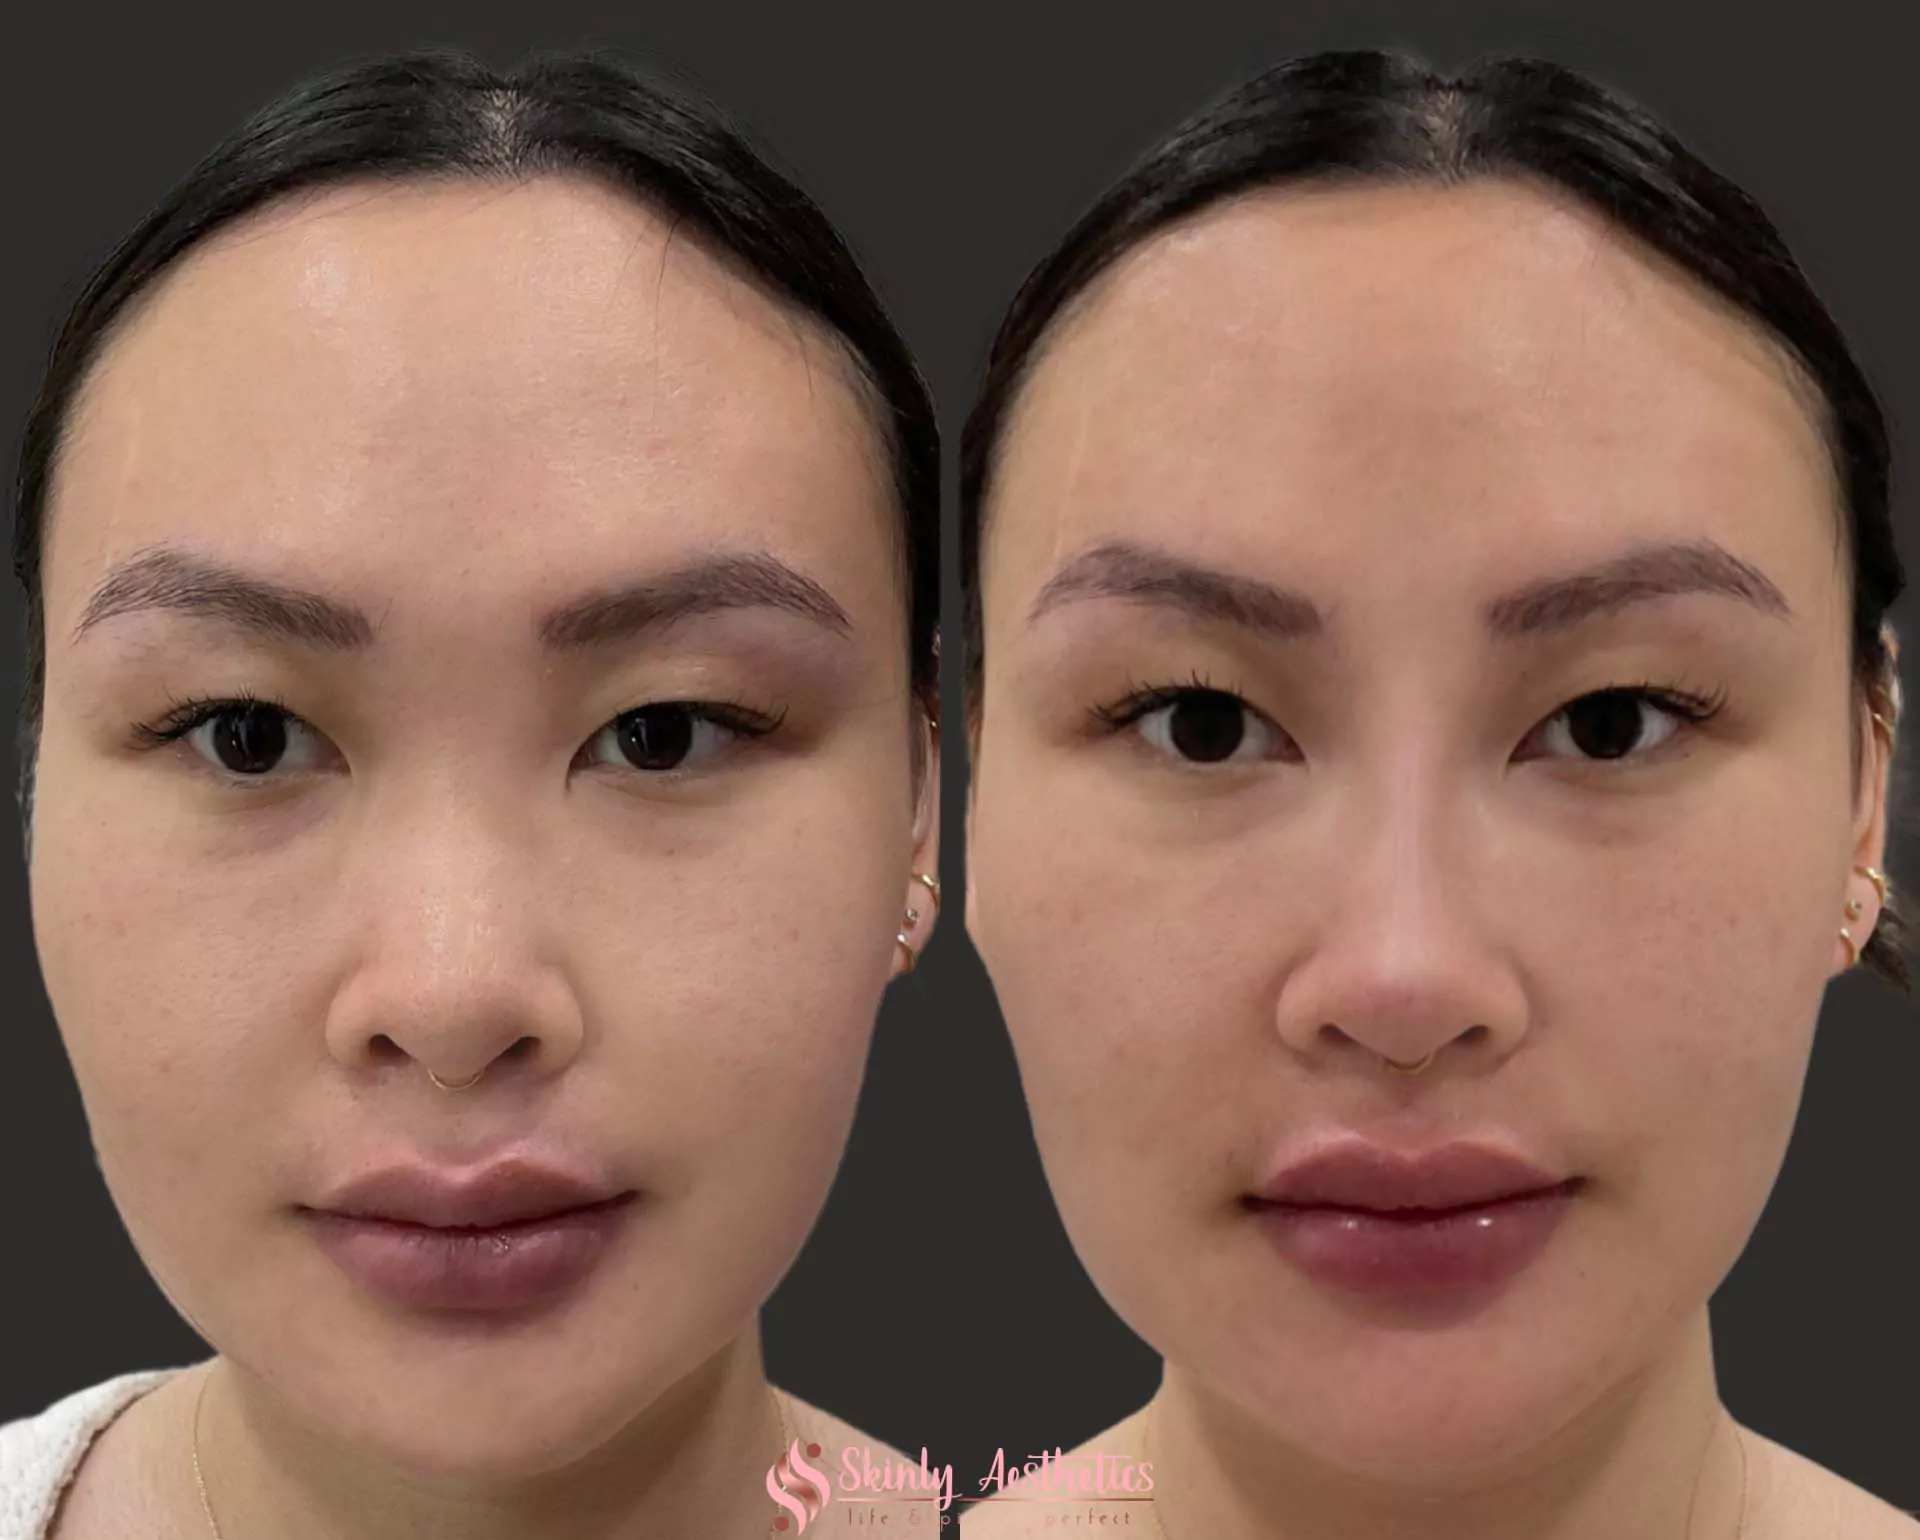 non surgical rhinoplasty to slim the nose and raise the nose bridge